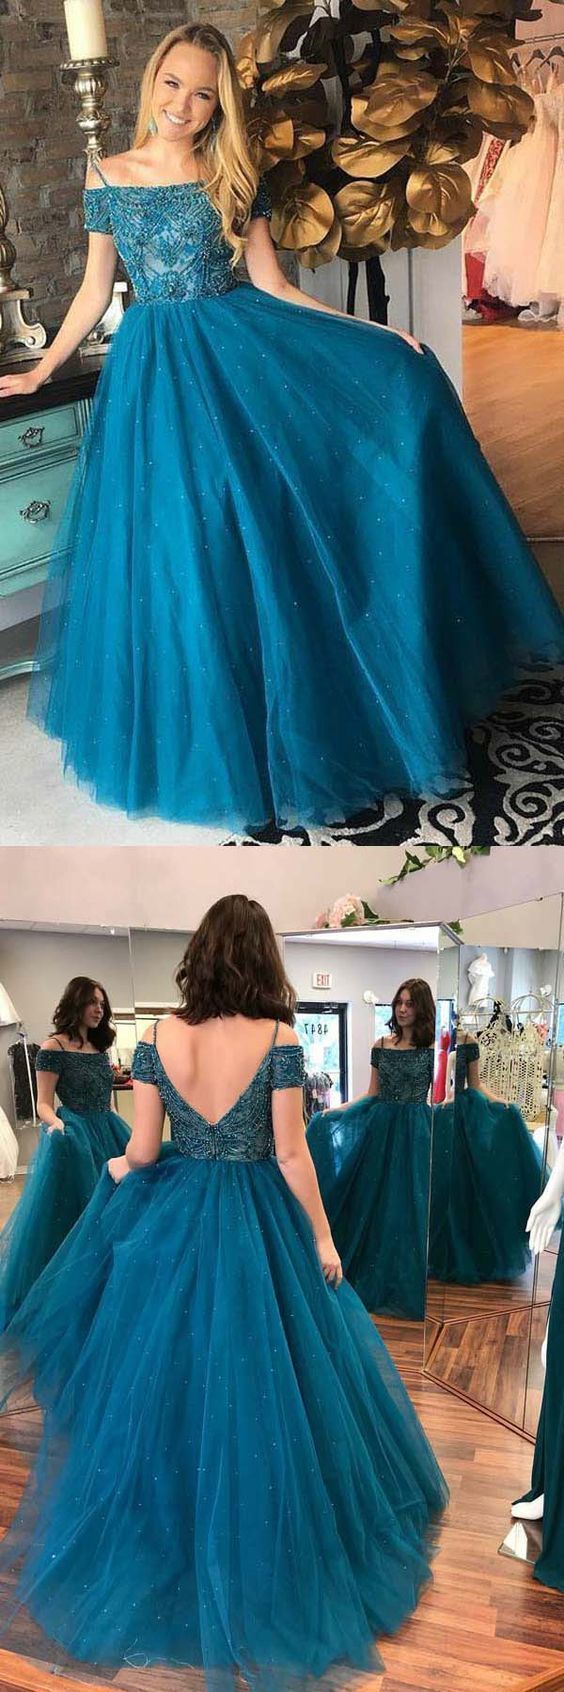 Ball Gown Off-the-Shoulder Tulle Prom Dress With Beading on Luulla